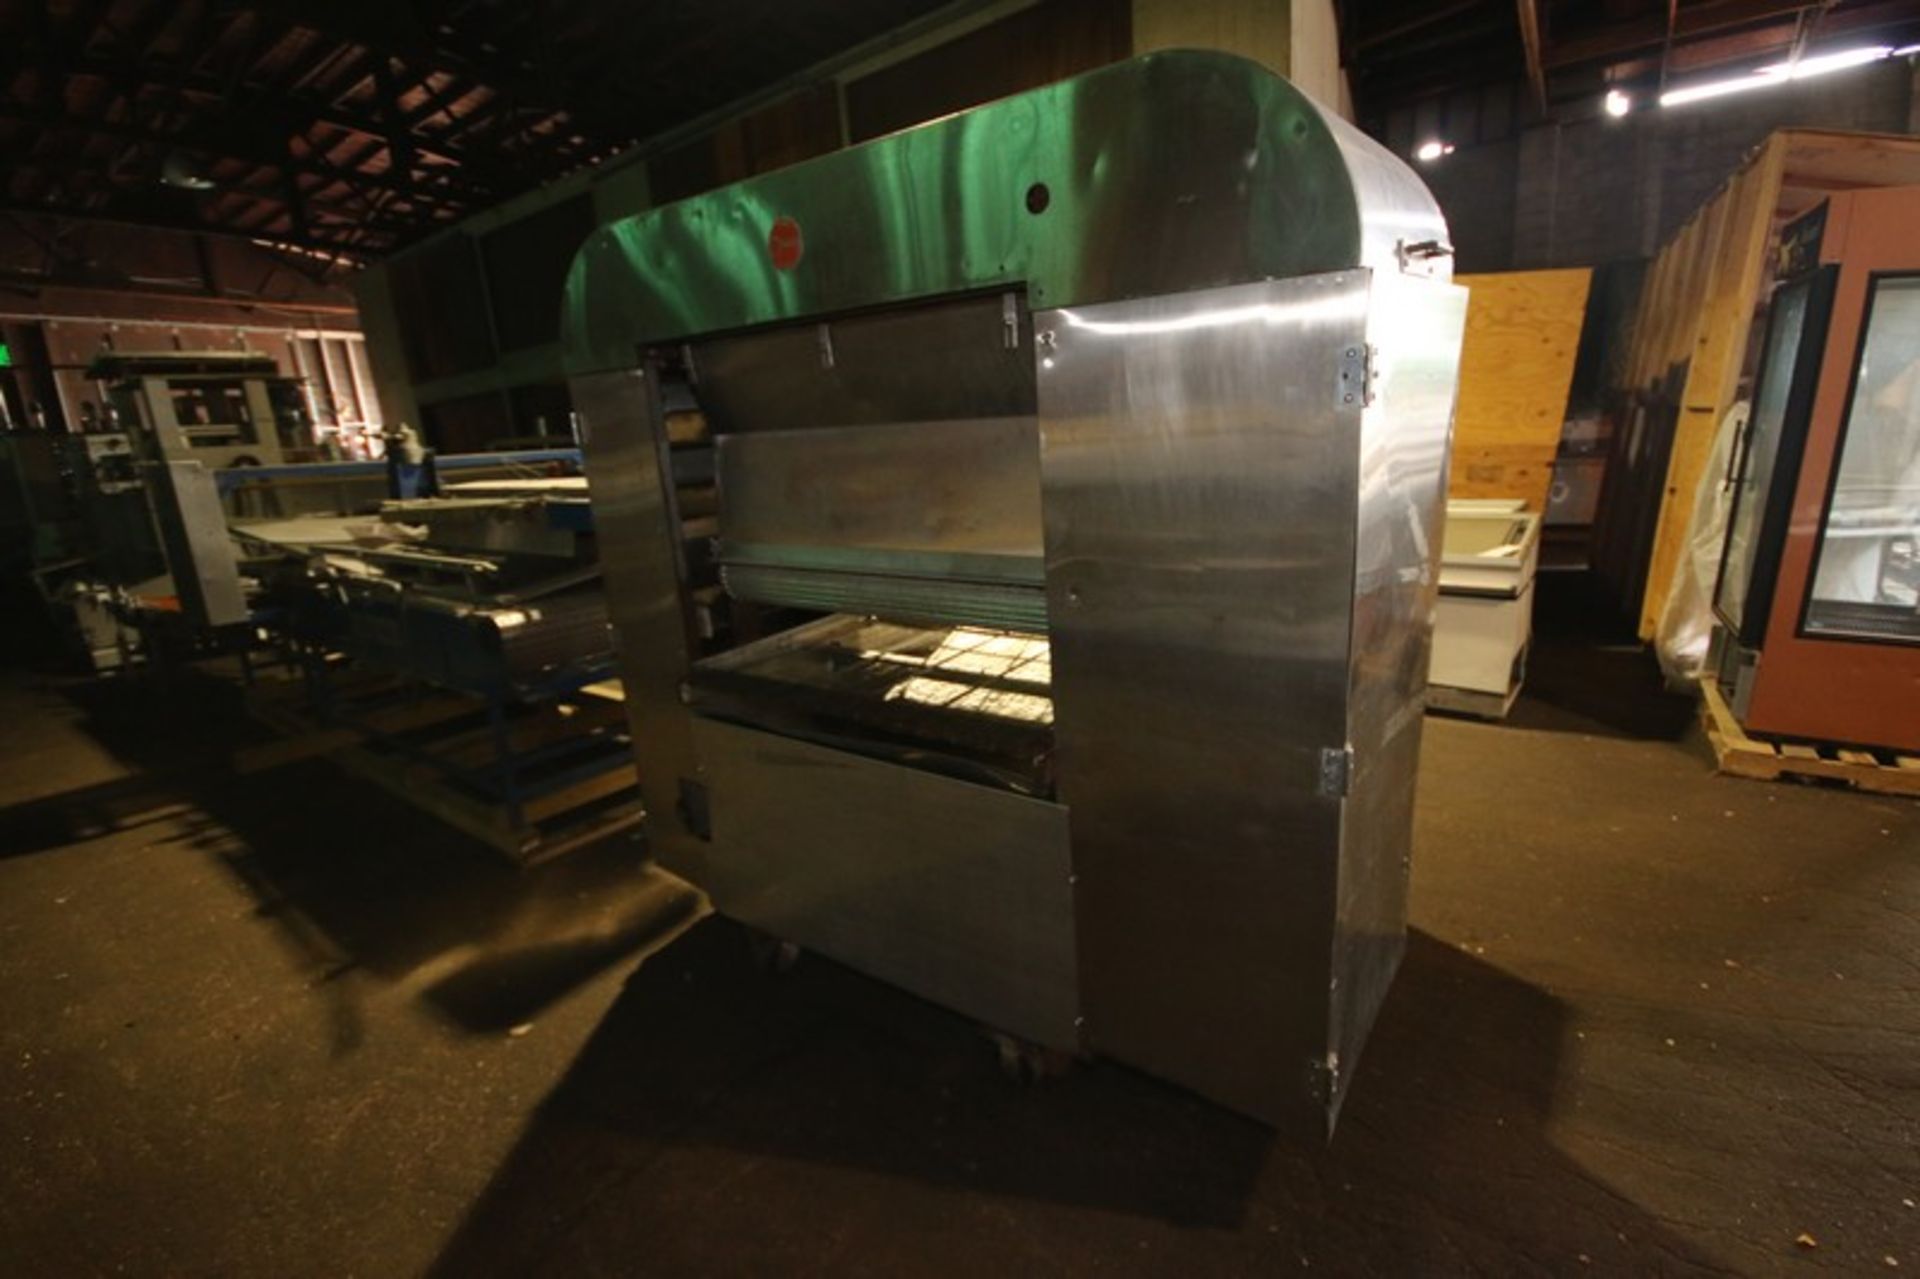 Oates S/S Depositor with 42" W Belt (INV#65769) (Located at the MDG Auction Showroom in - Image 6 of 7